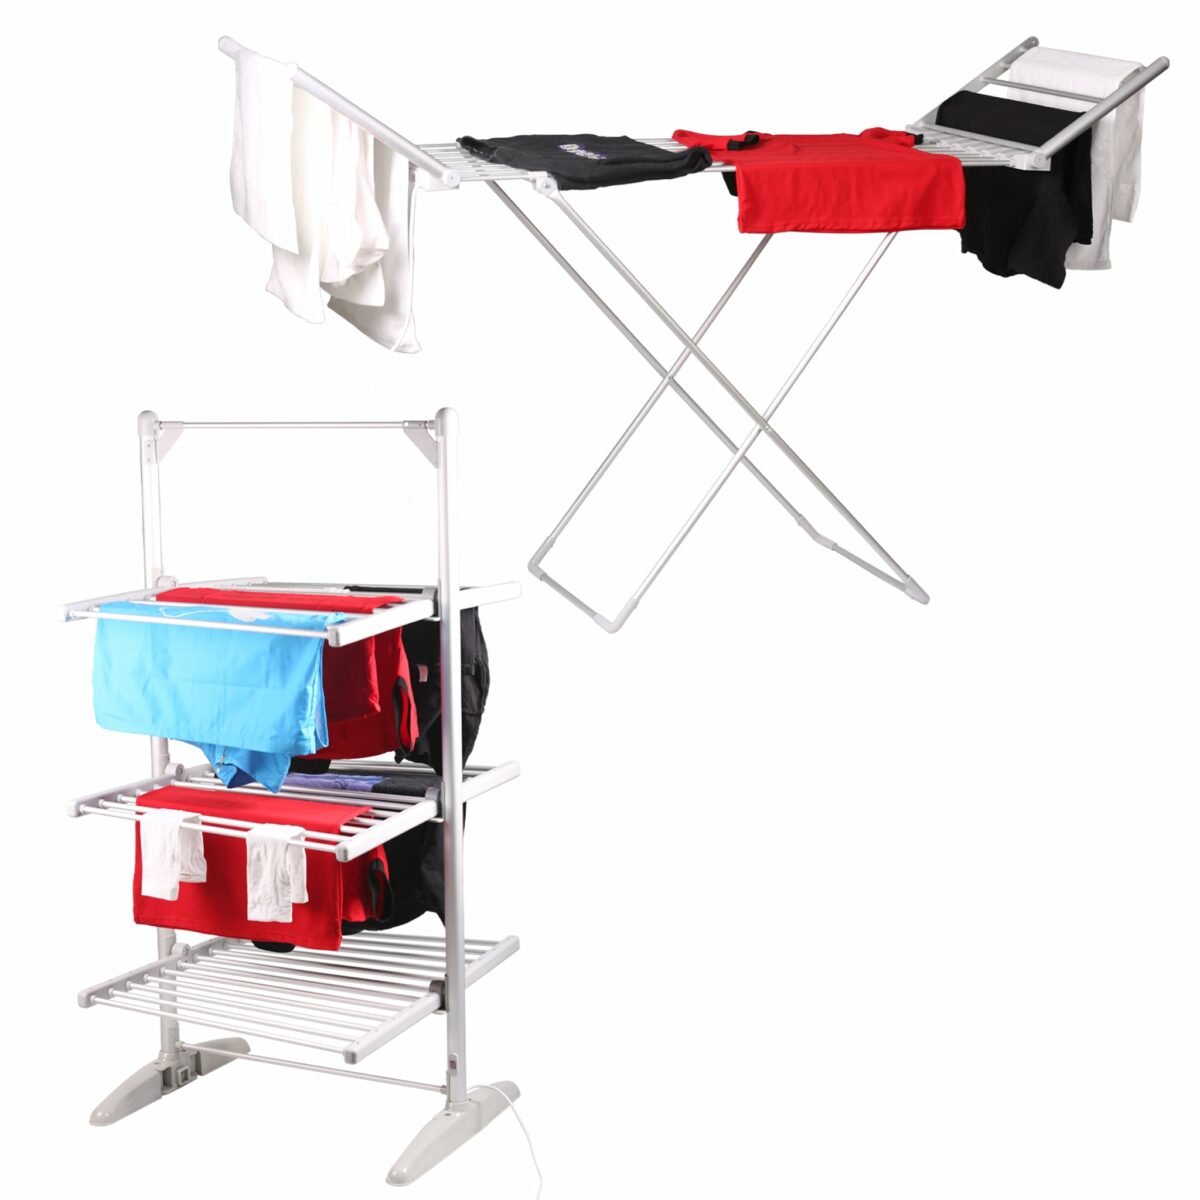 Heated Clothes Airer Drying Rack Electric 2 for 1 Bundle Deal - ABIS